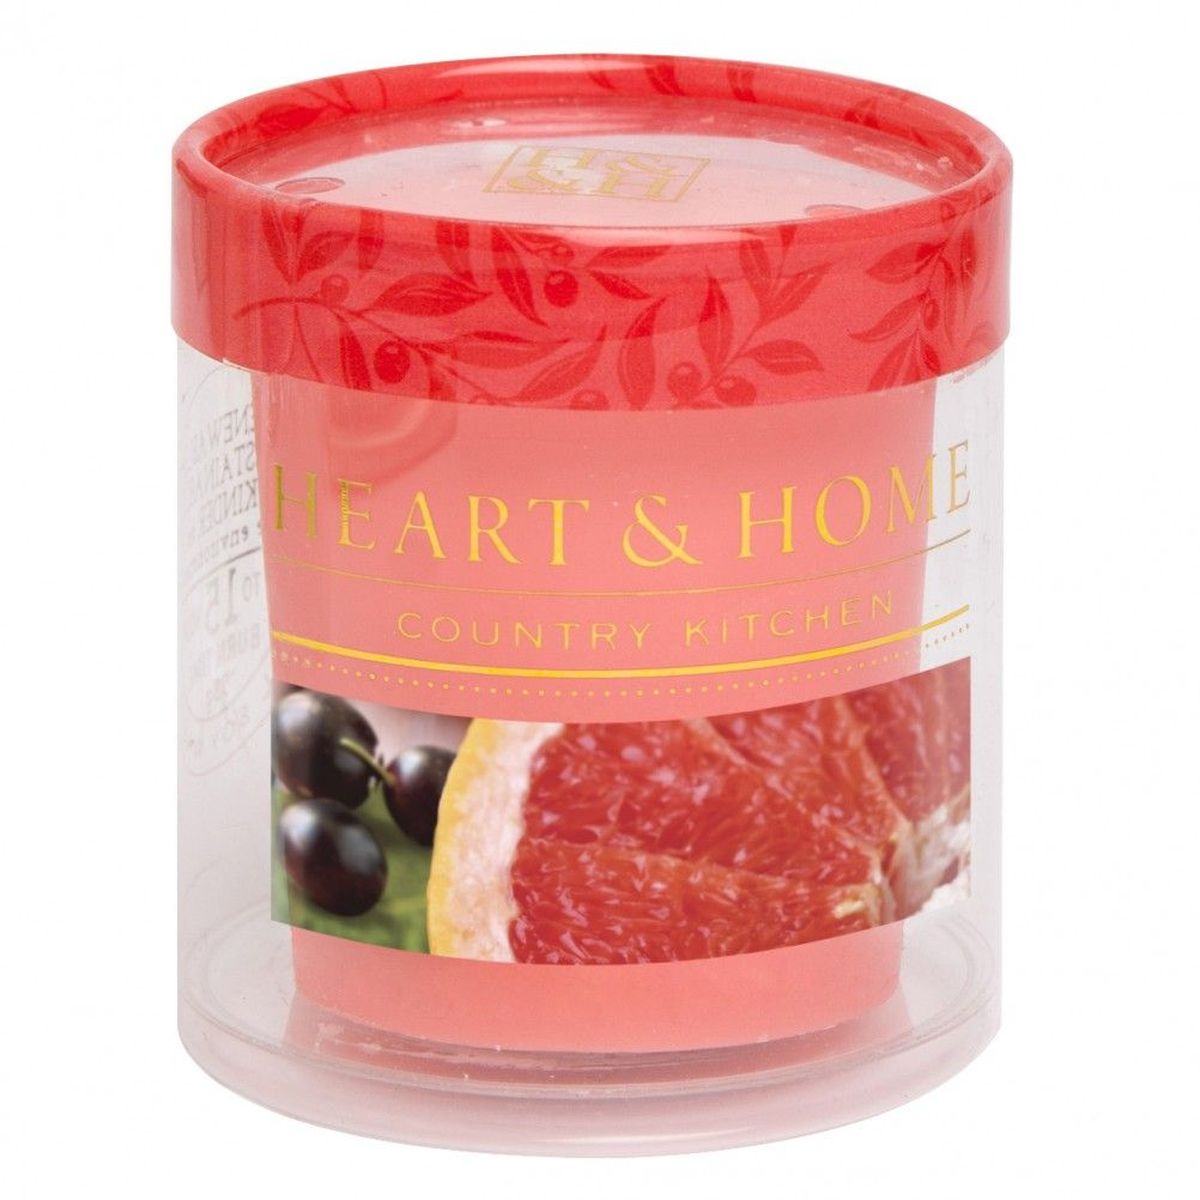 Bougie Votive Heart and Home 15 heures Pamplemousse rose cassis